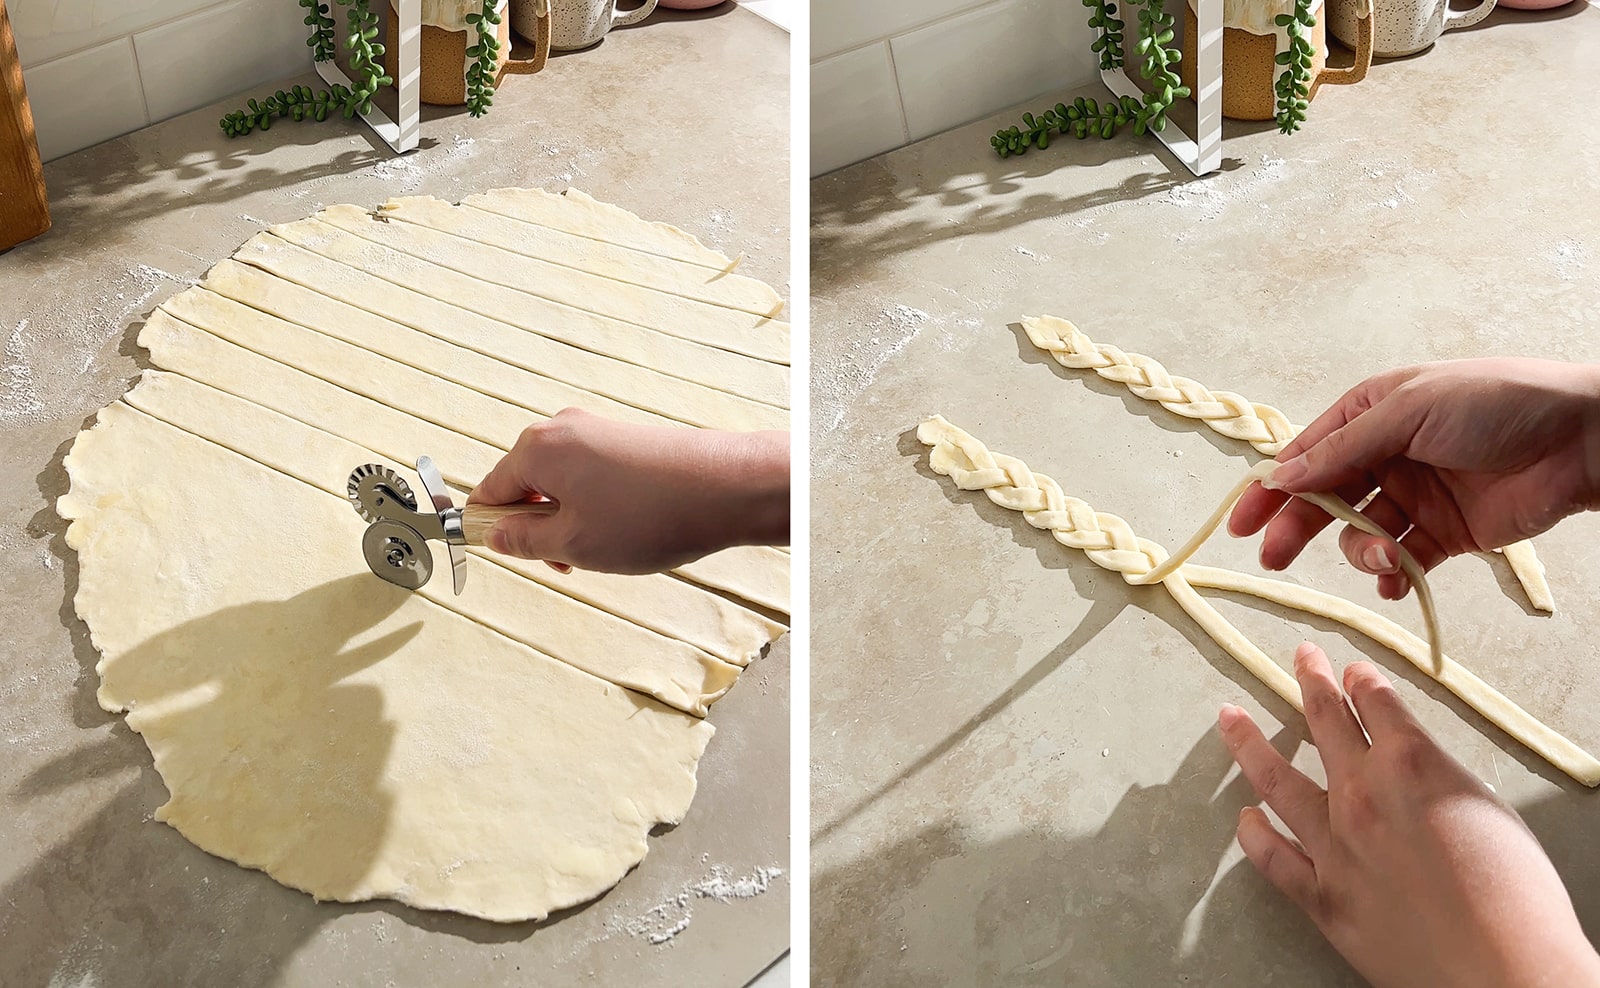 Left to right: hand cutting dough into strips with wheel cuttter, hands braiding dough strips.